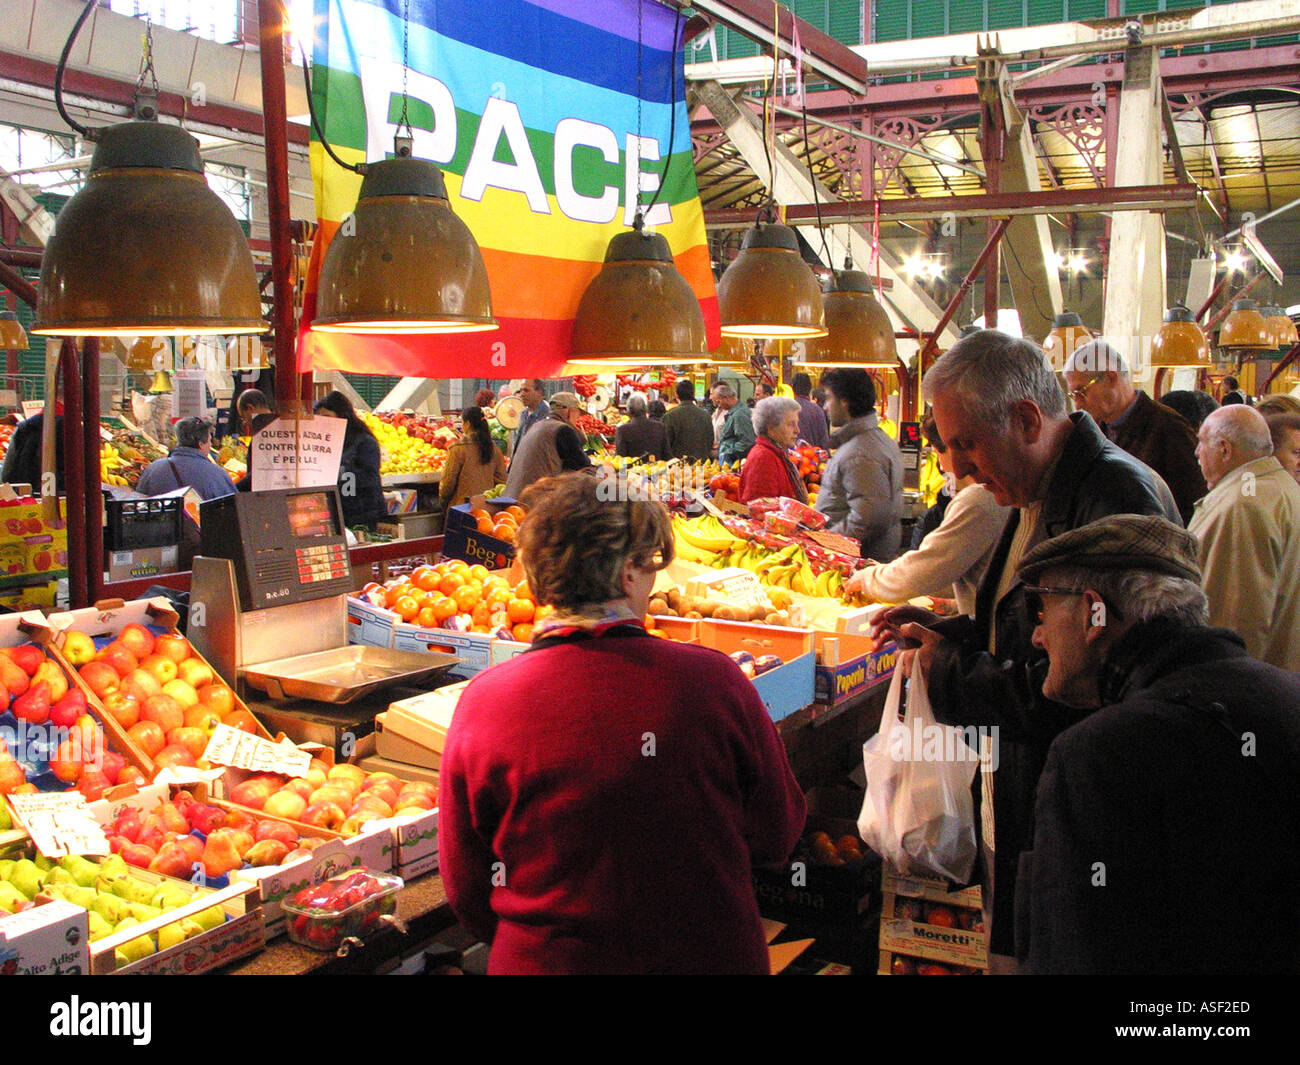 Peace flag hangs over produce in Florence Italy s Central Market Stock Photo